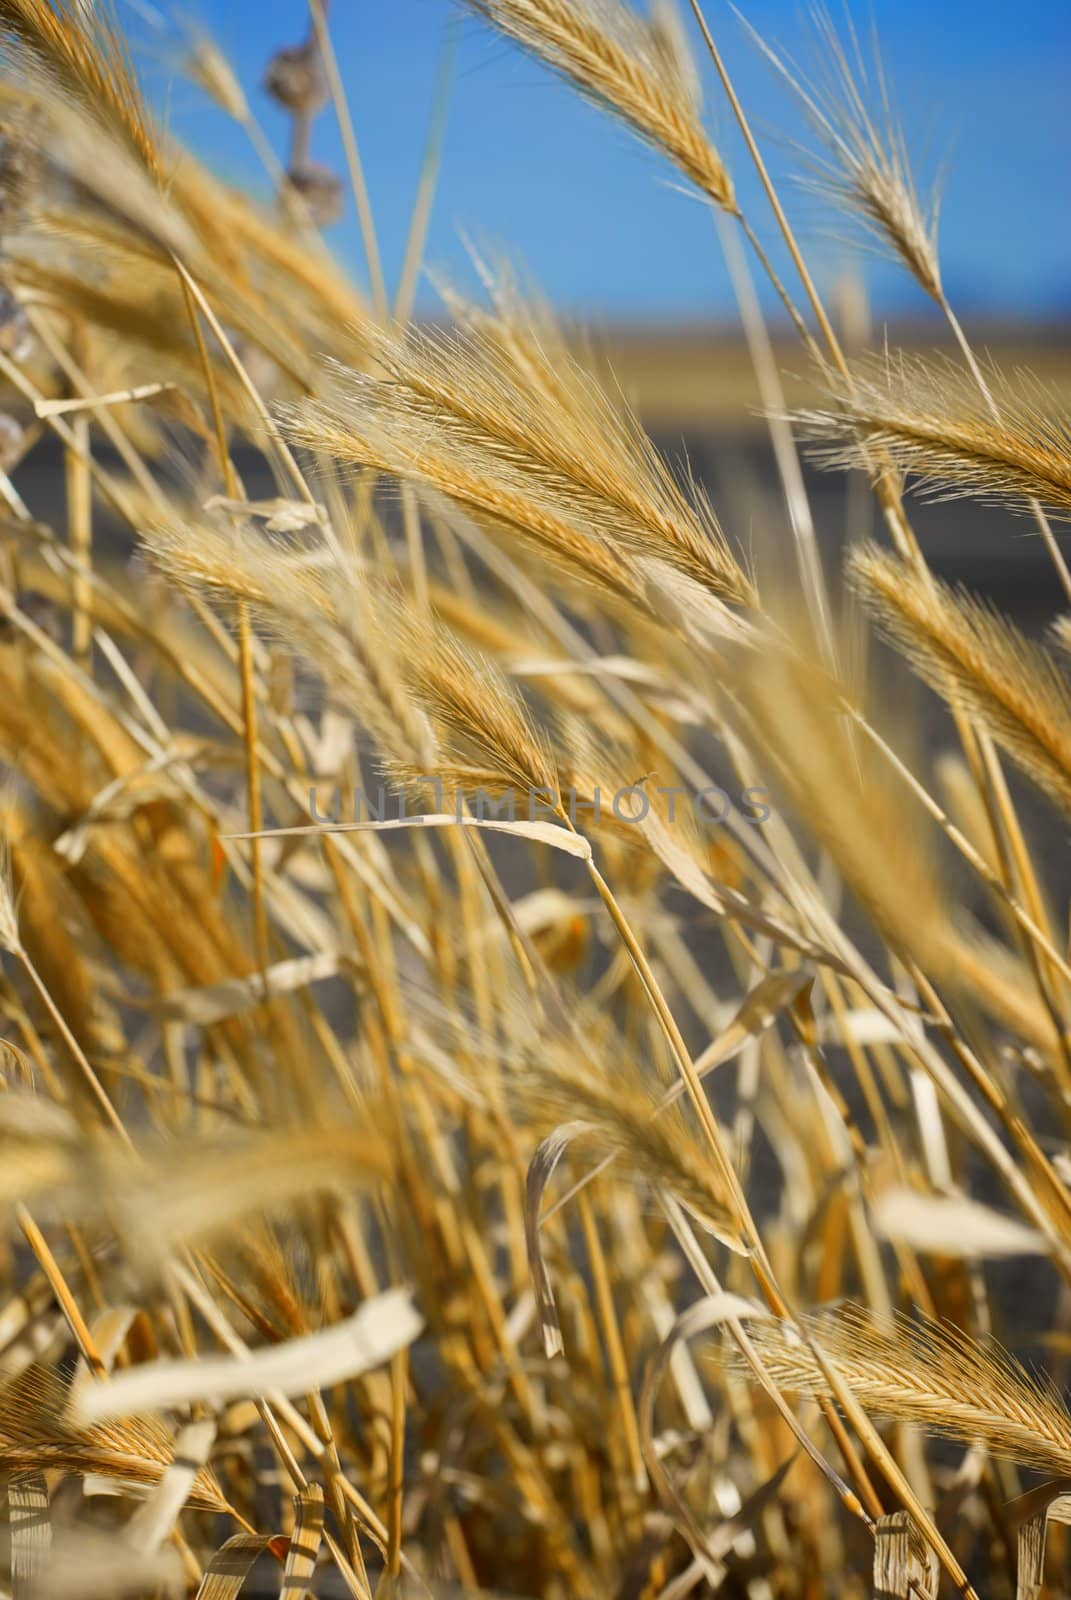 Golden Wheat with Blue Sky by pixelsnap